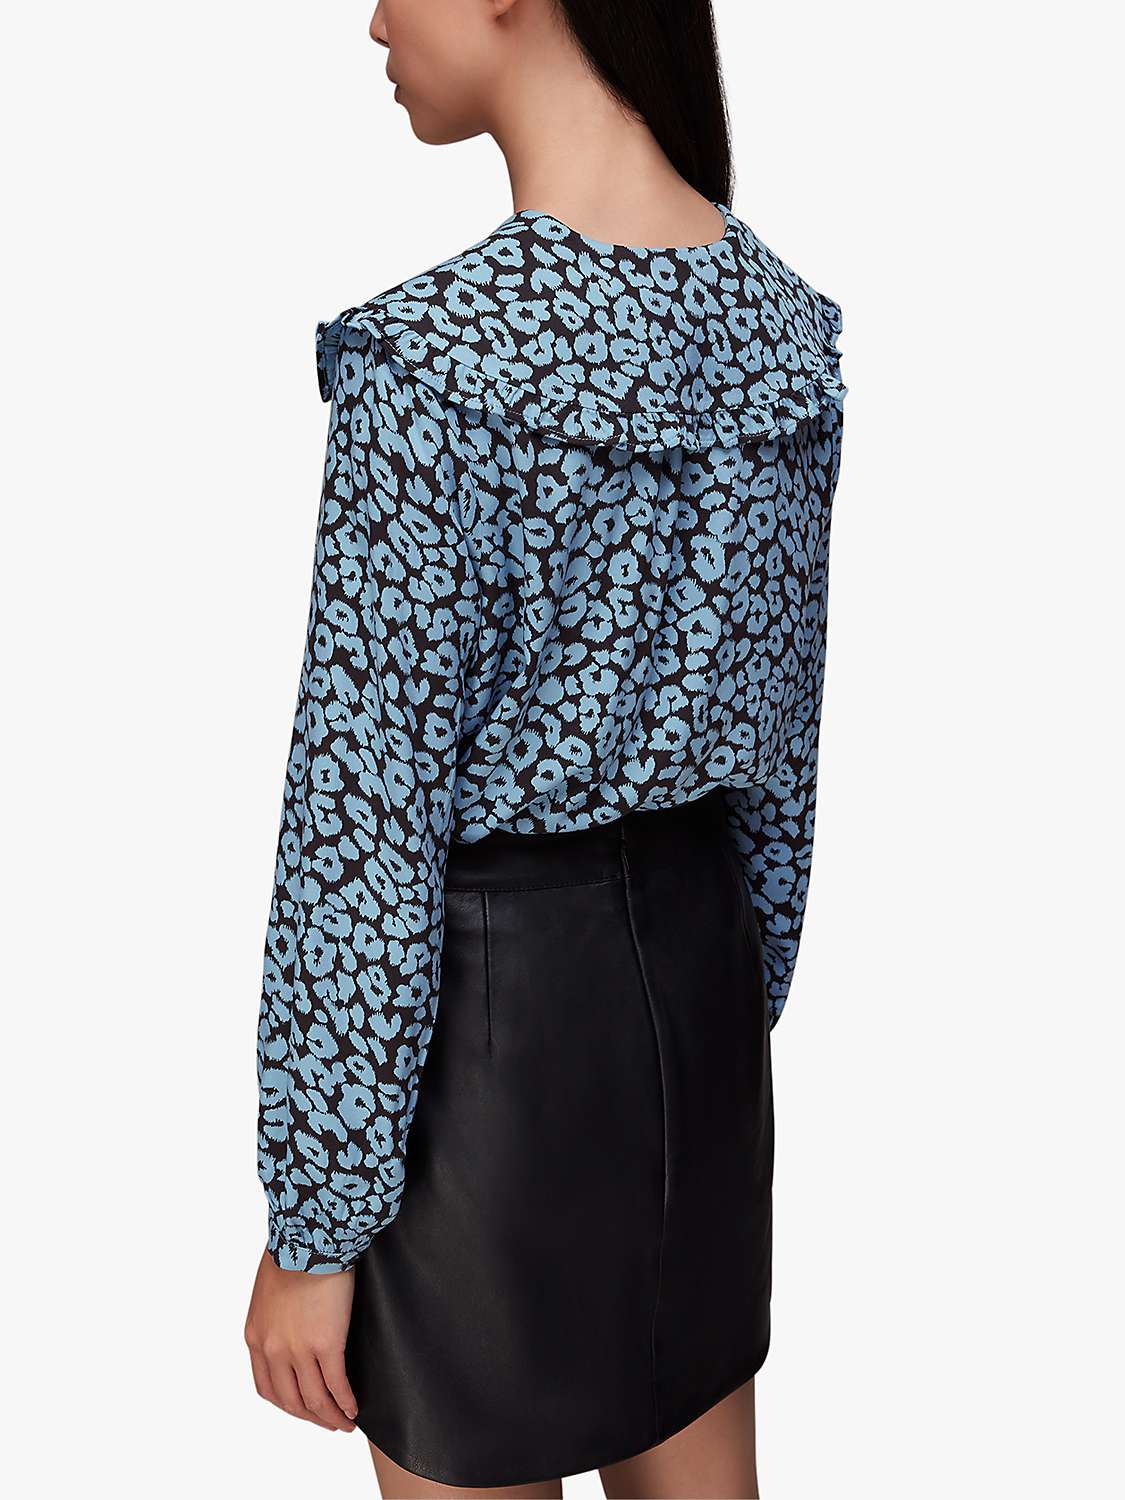 Buy Whistles Fuzzy Leopard Print Collar Blouse, Blue/Multi Online at johnlewis.com